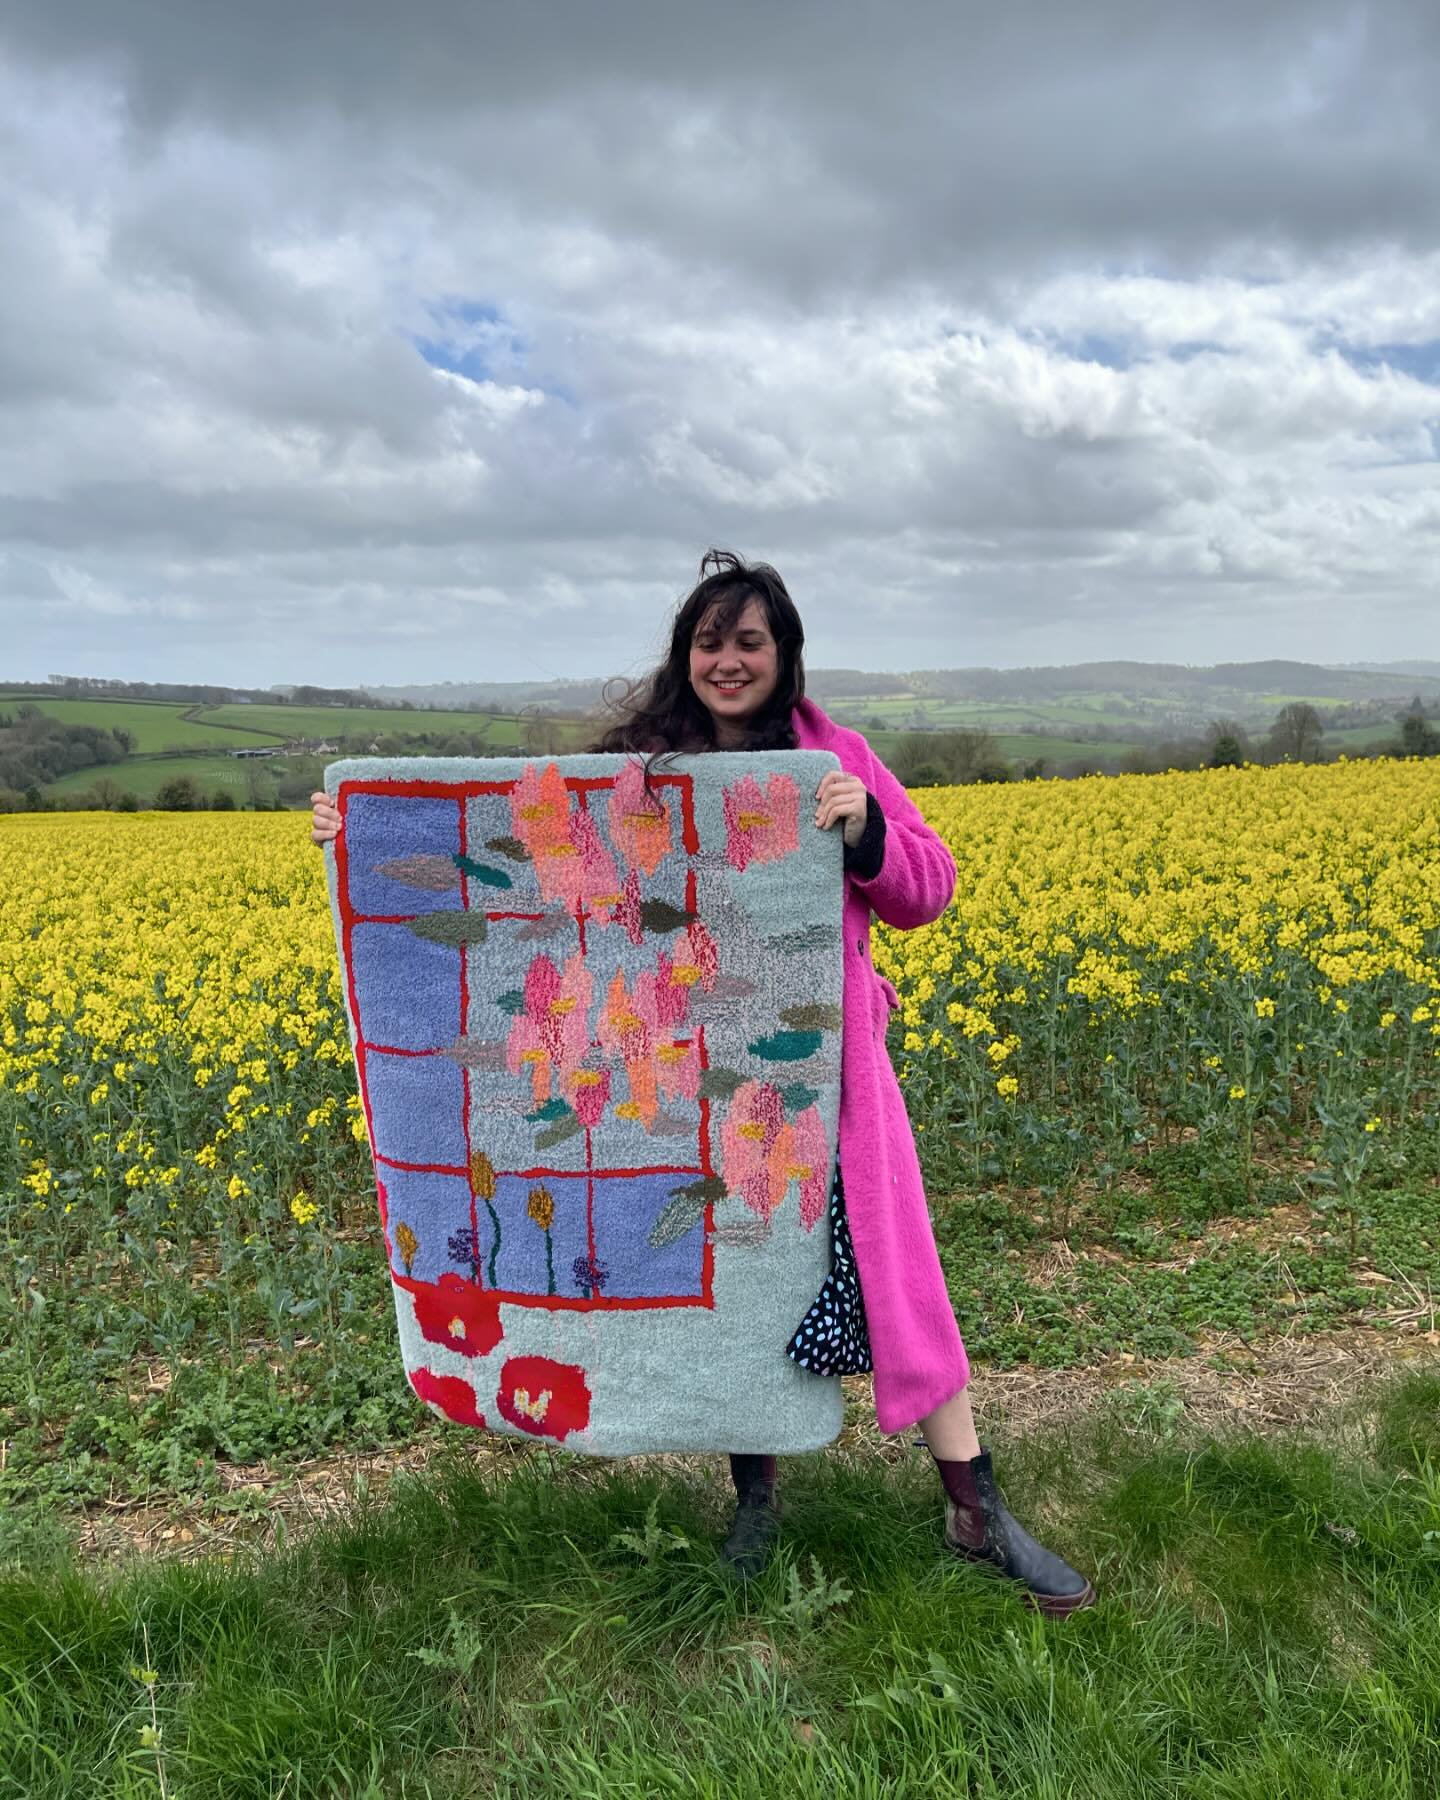 The Briar rug in a yellow field! 

The briar rug is the second floral garden rug that I made and it&rsquo;s based on the garden at Rodmarton manor. I was inspired by the roses growing over the leaded windows of the outbuildings. 

I really love appro